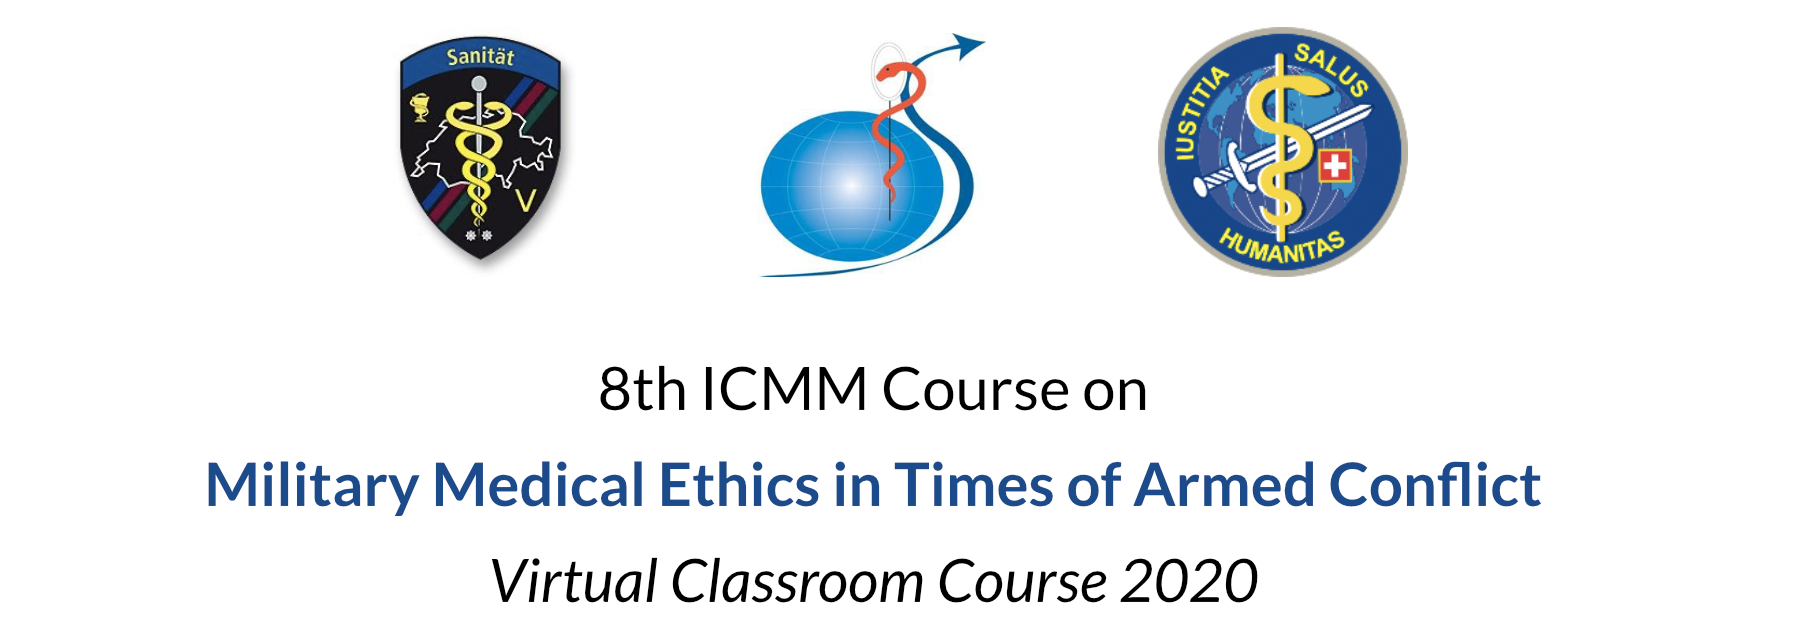 8th ICMM Course on Military Medical Ethics